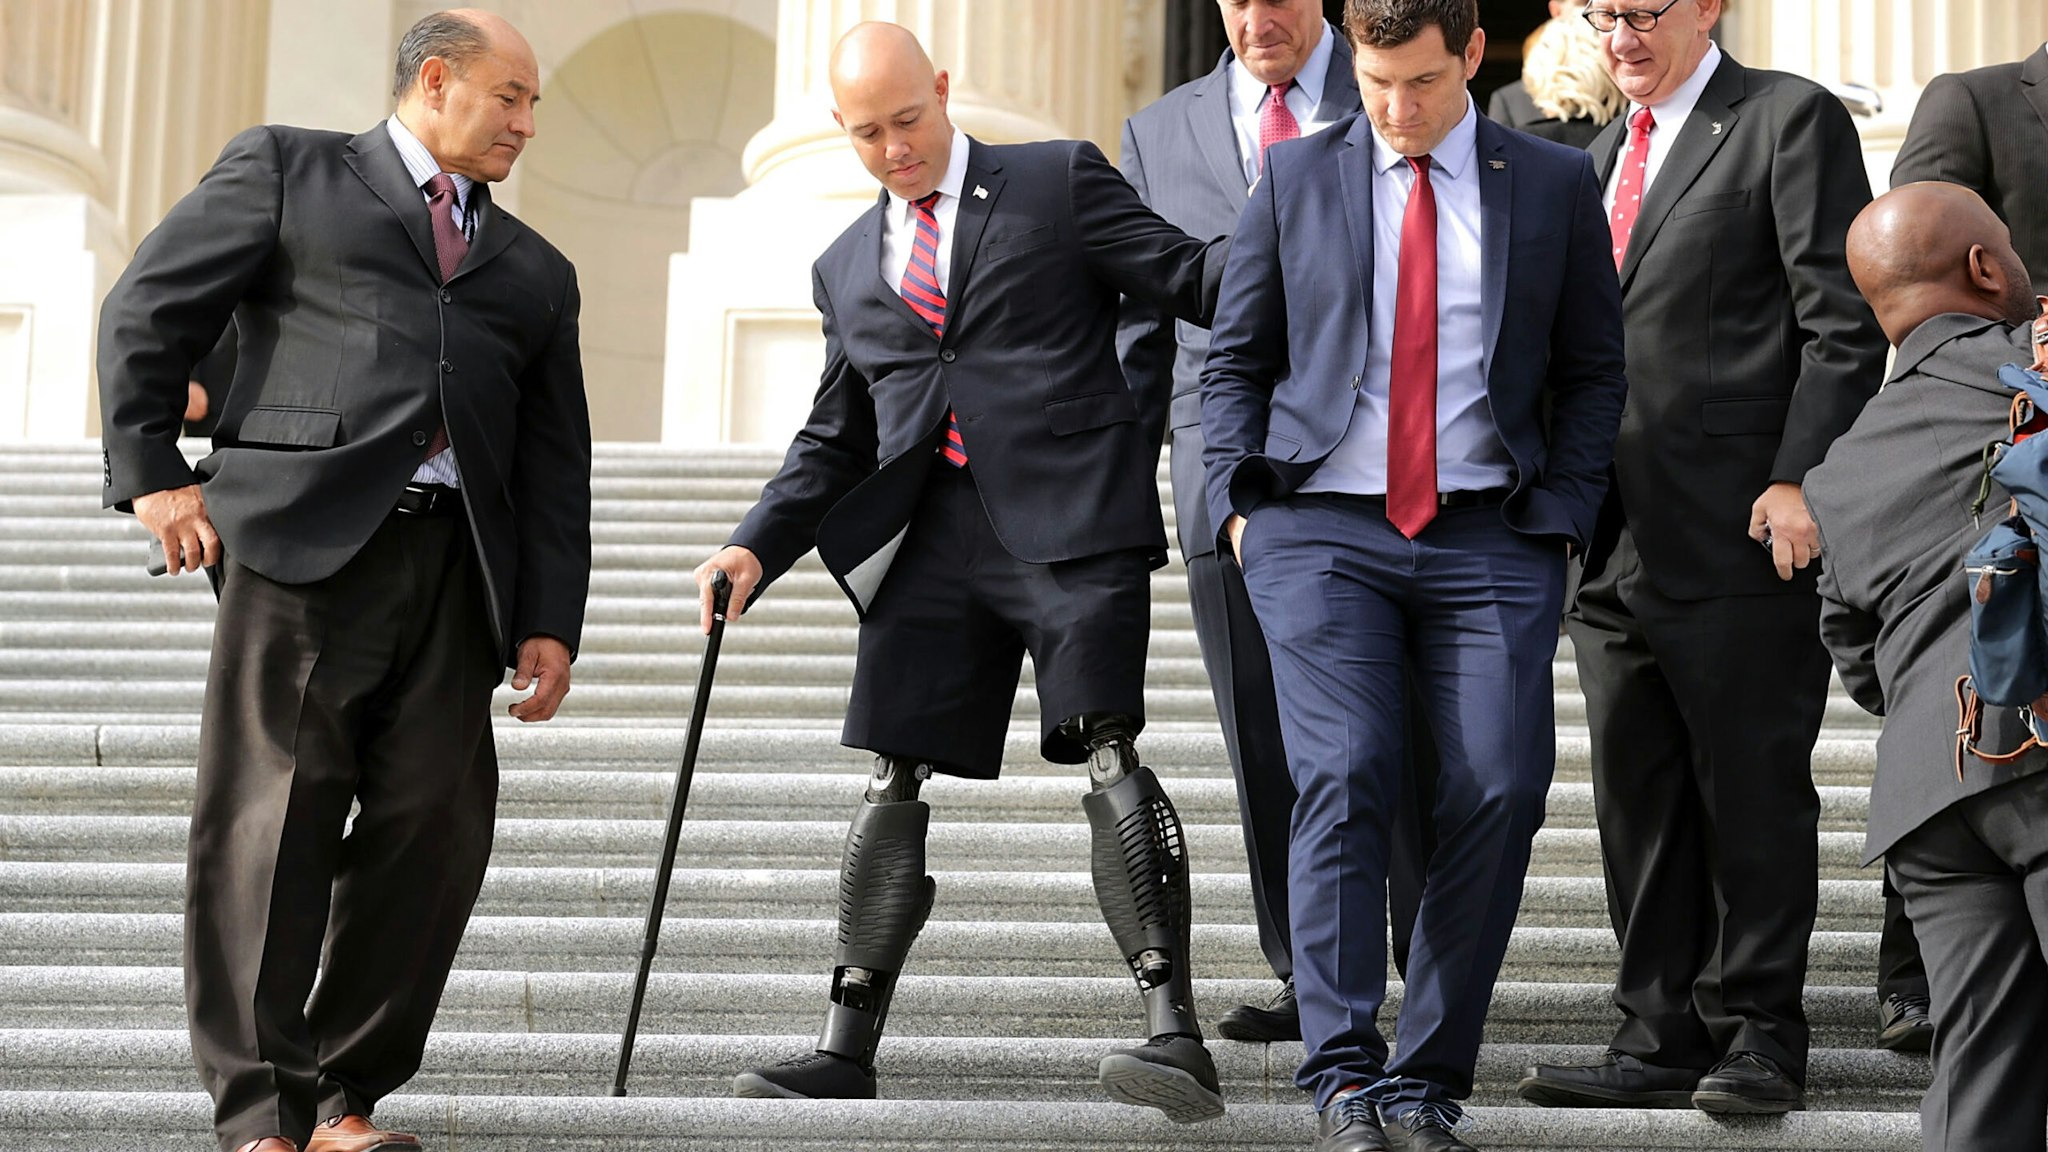 WASHINGTON, DC - NOVEMBER 15: Incoming Republican and Democratic members of Congress, including former U.S. Army Special Operations soldier and Representative-elect Brian Mast (R-FL) (2nd L), walk down the steps of the House of Representatives before posing for a group photograph November 15, 2016 in Washington, DC. There are 50 members of the freshmen class that will join the 115th Congress when it begins in January 2017.